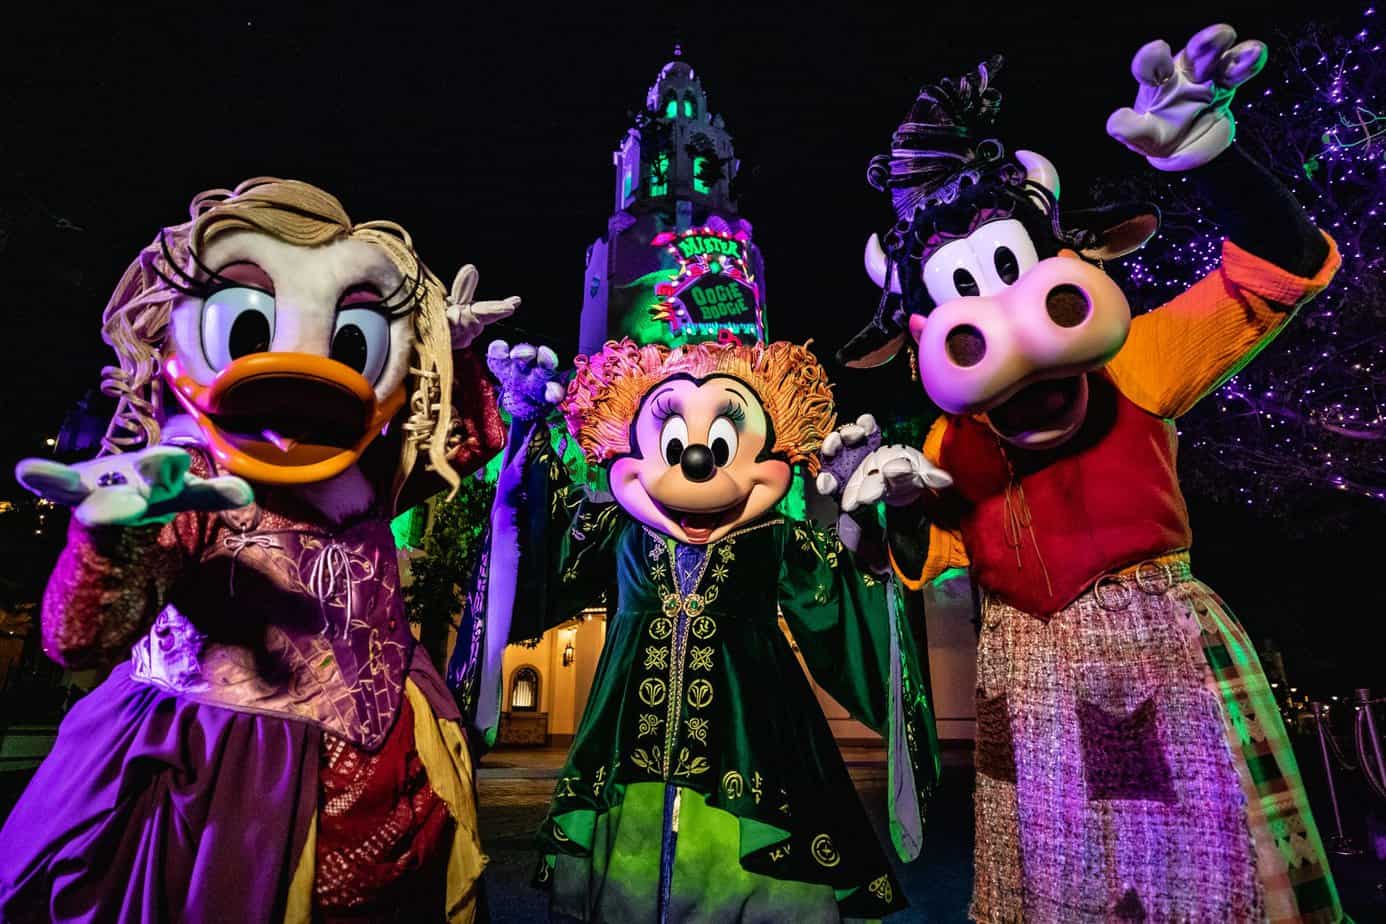 Daisy duck, Minnie mouse and Clarabelle cow dressed up for disney after dark